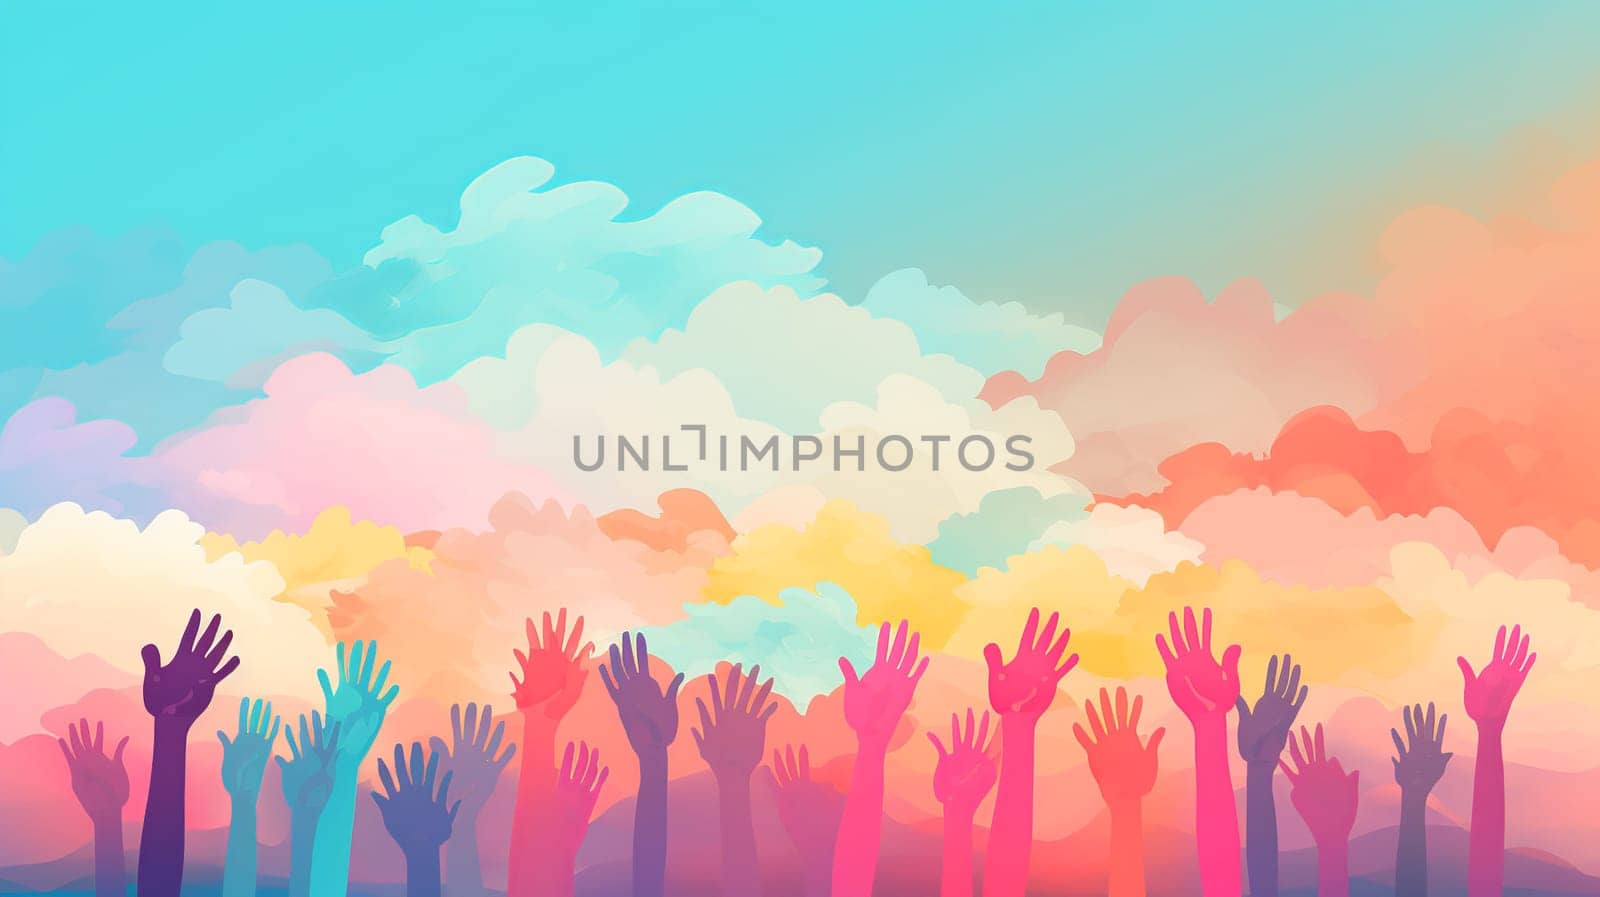  group of small children's hands Rainbow color wallpaper background Generate AI by Mrsongrphc